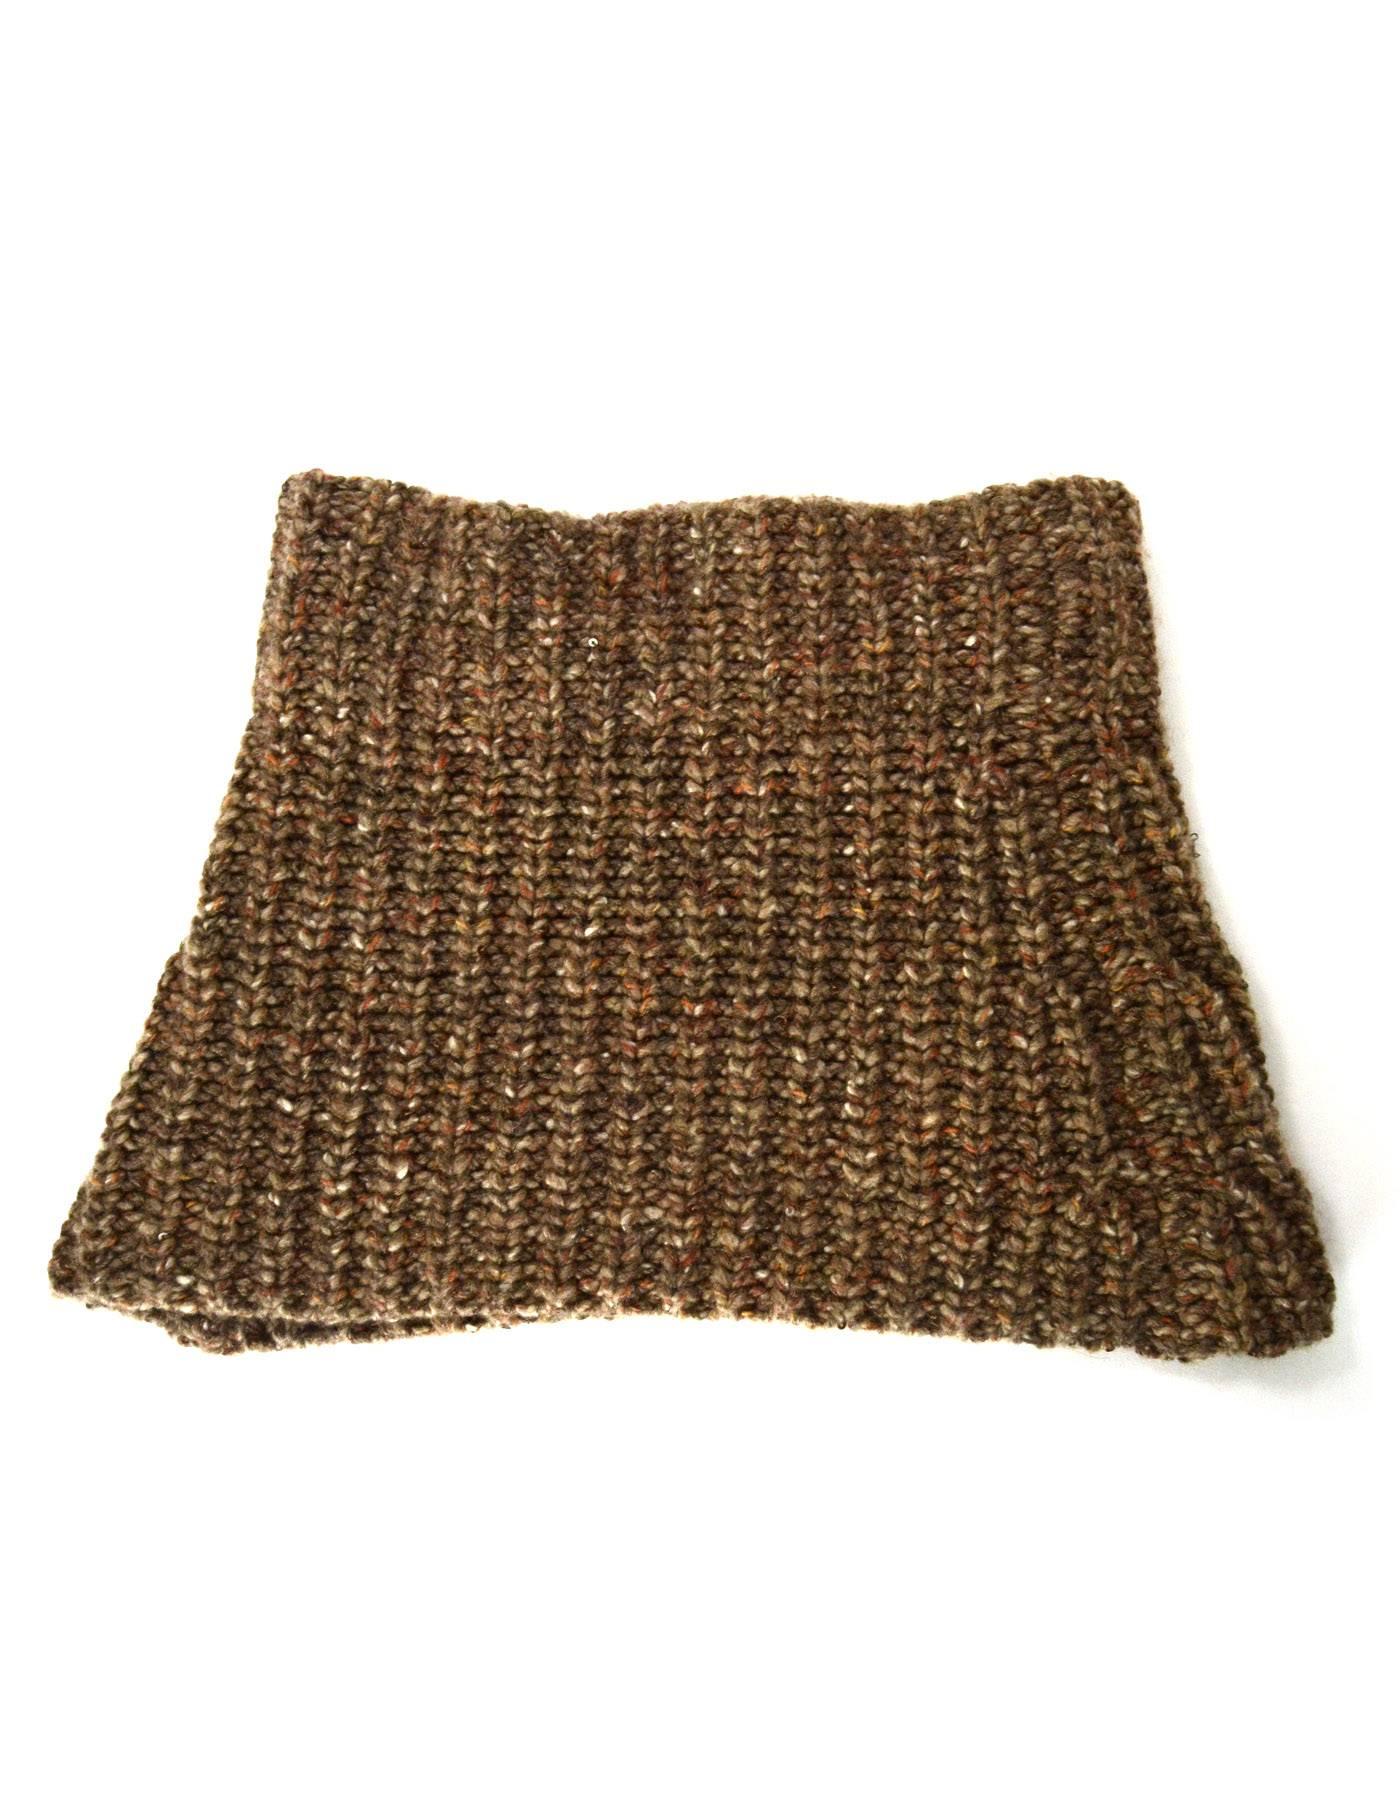 Brunello Cucinelli Brown Knit Cashmere Snood 
Features small sequins stitched throughout
Made In: Italy
Color: Brown
Composition: 80% cashmere, 13% wool, 7% silk
Overall Condition: Excellent pre-owned condition
Measurements: 
Circumference: